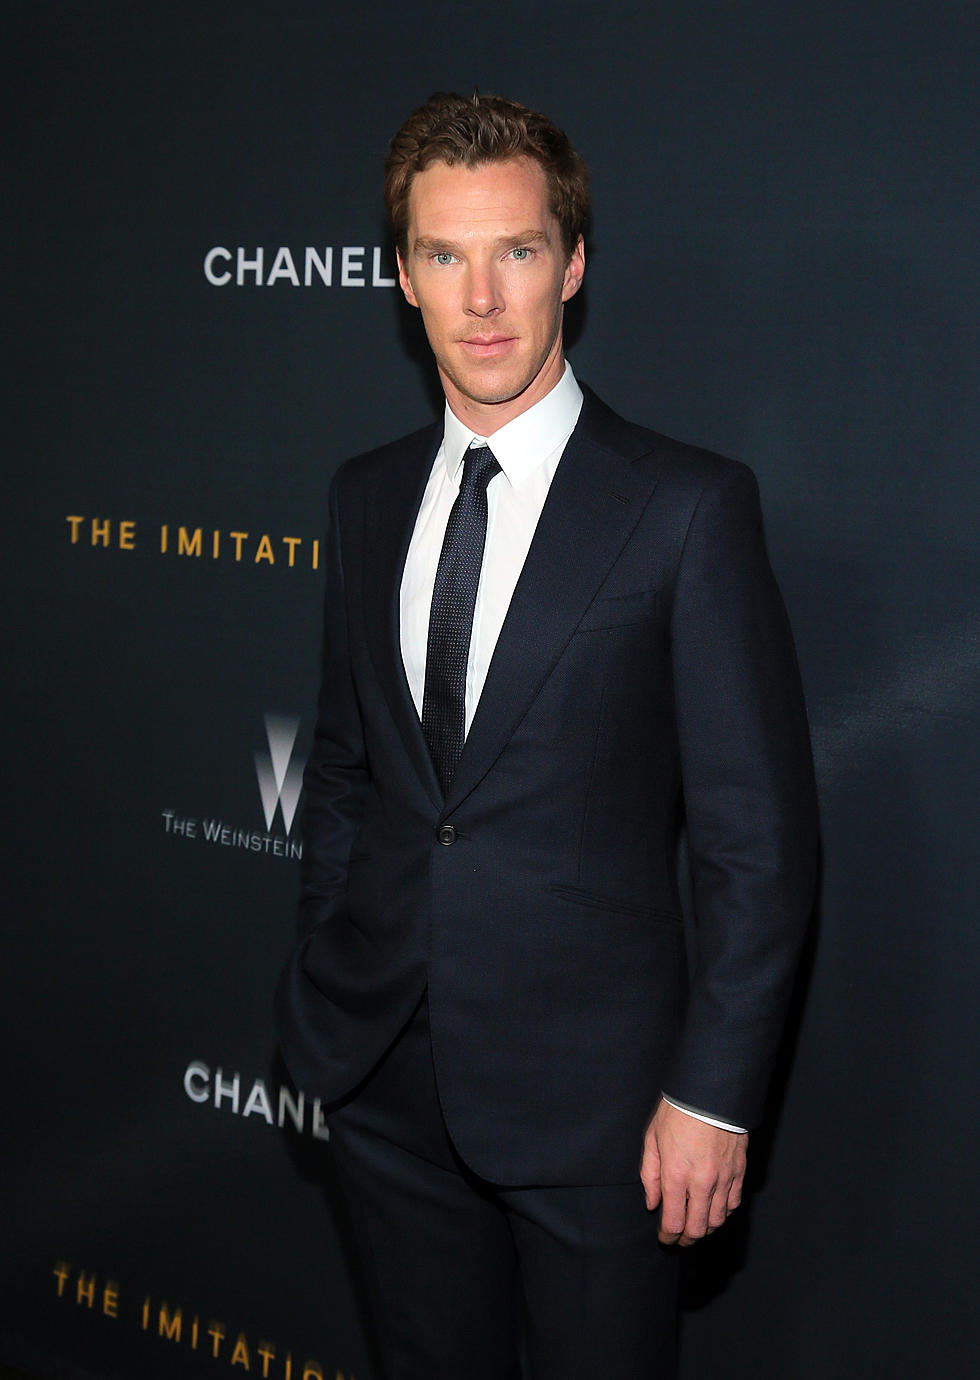 Benedict Cumberbatch Promoting New Film Does Impressions In 1 Minute [VIDEO]